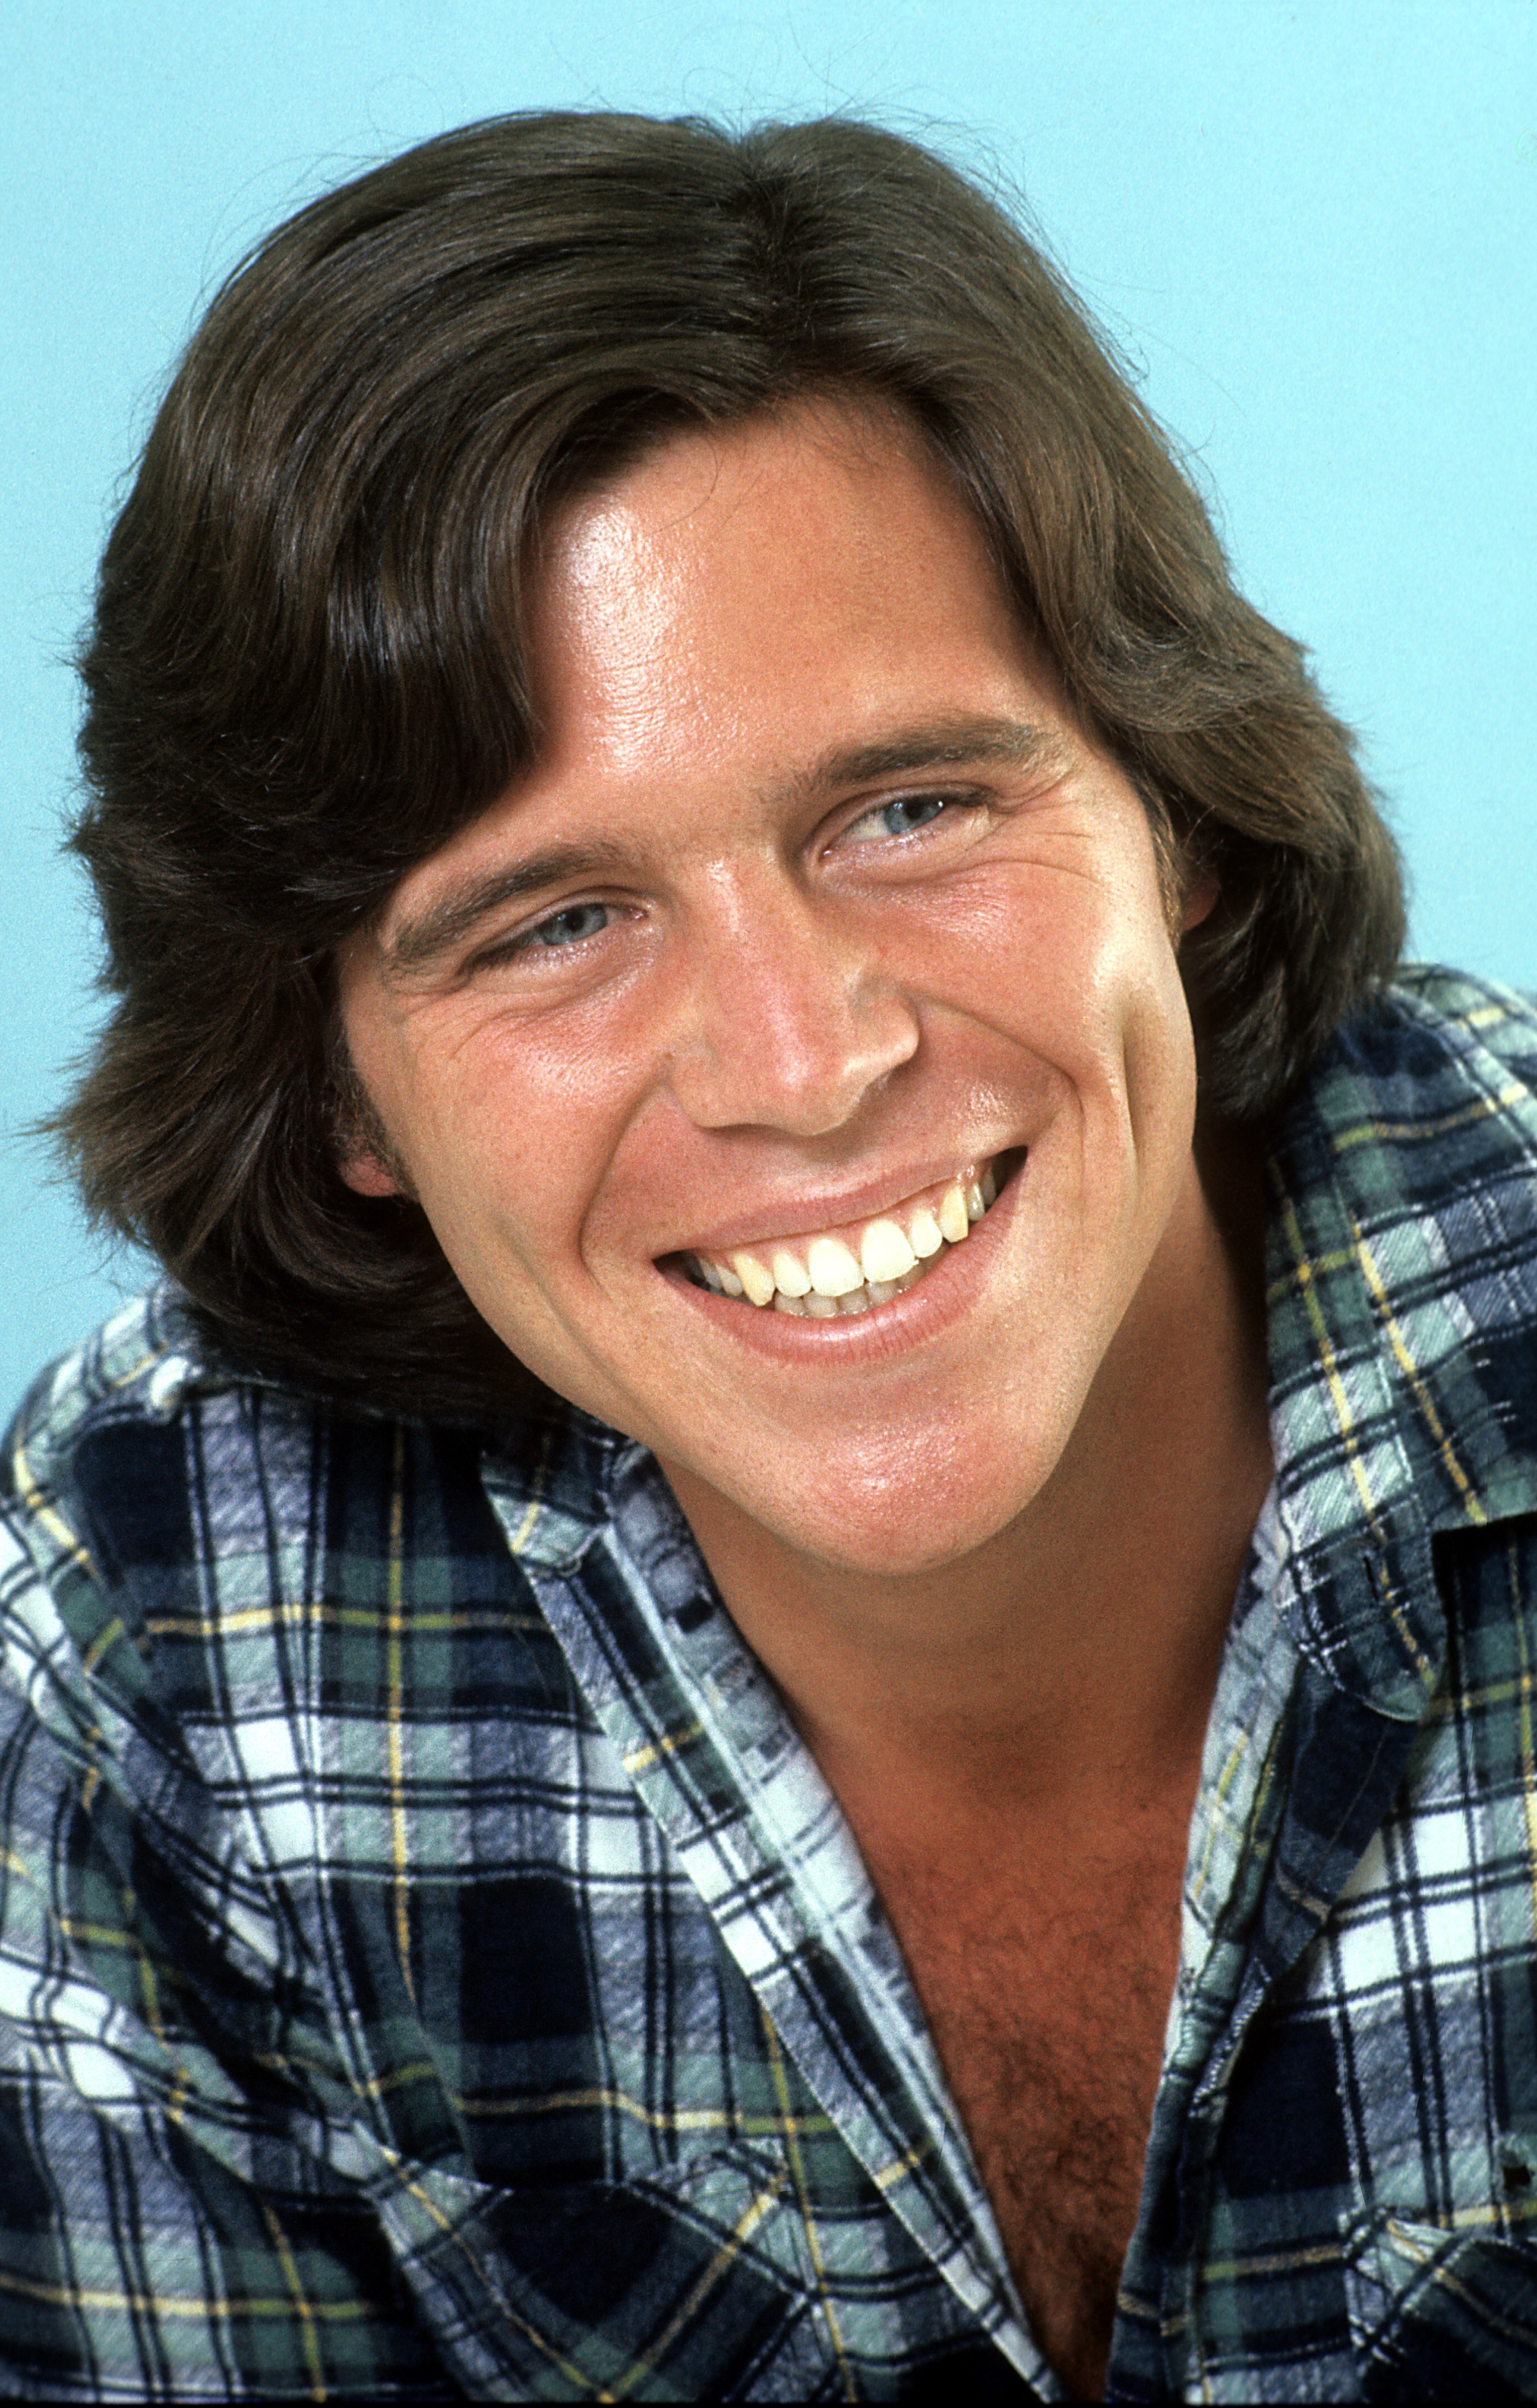 Actor Grant Goodeve poses for a portrait in circa 1977. | Source: Getty Images